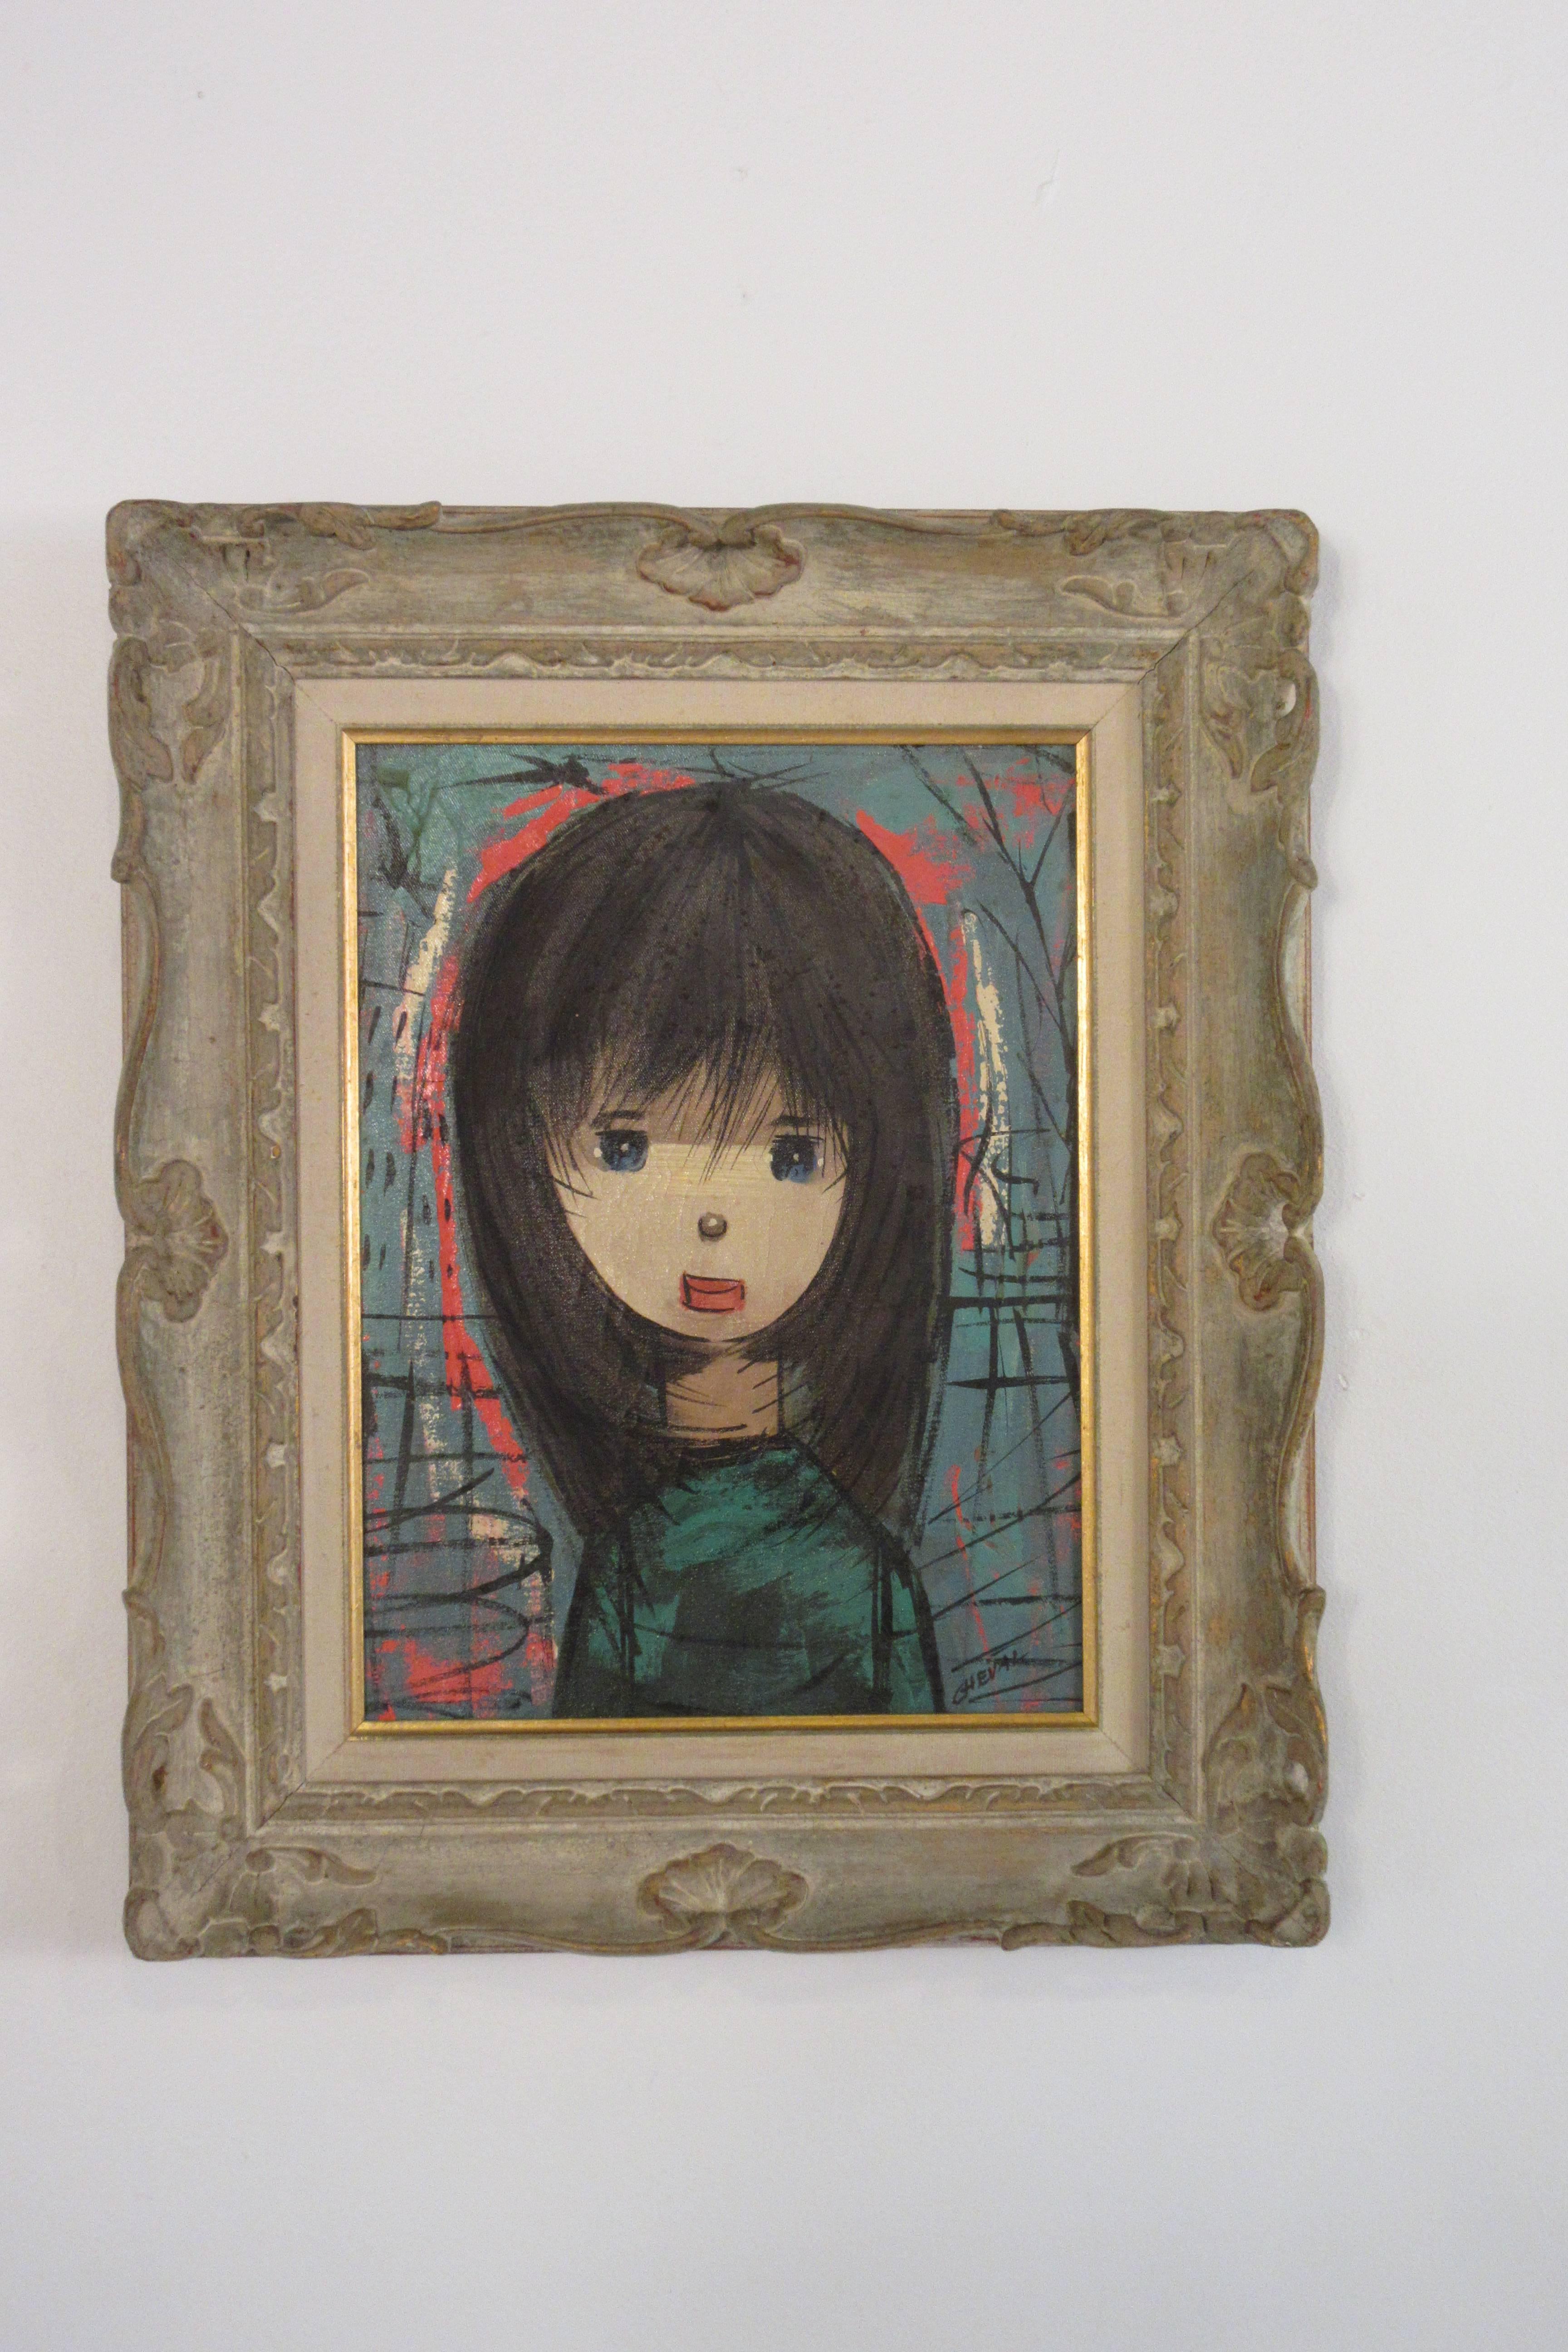 1960s oil on canvas young girl with original carved wood frame.